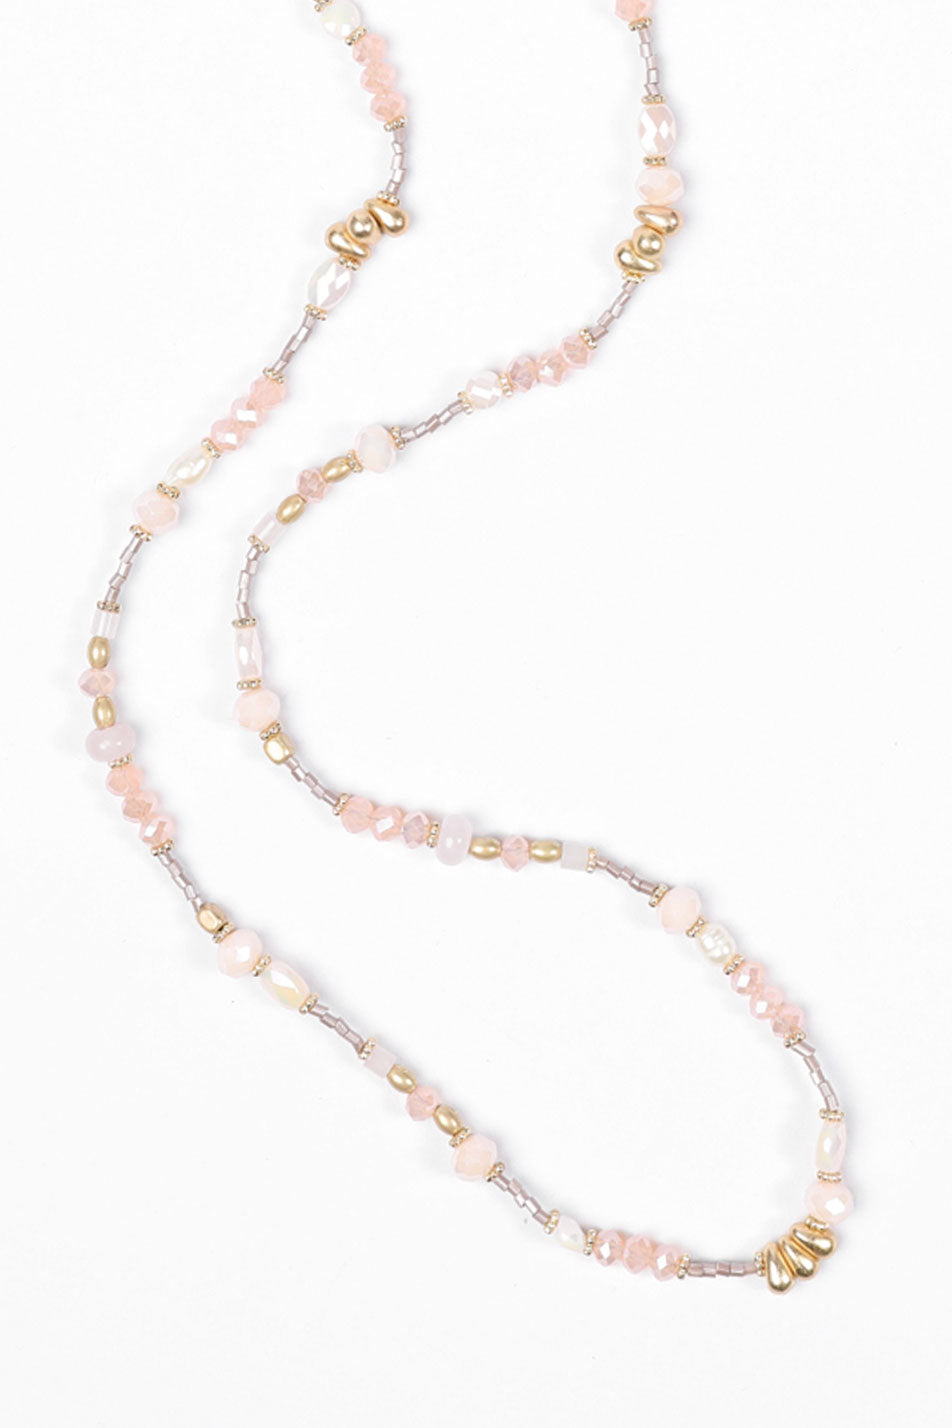 DAINTY BEADED LONG NECKLACE